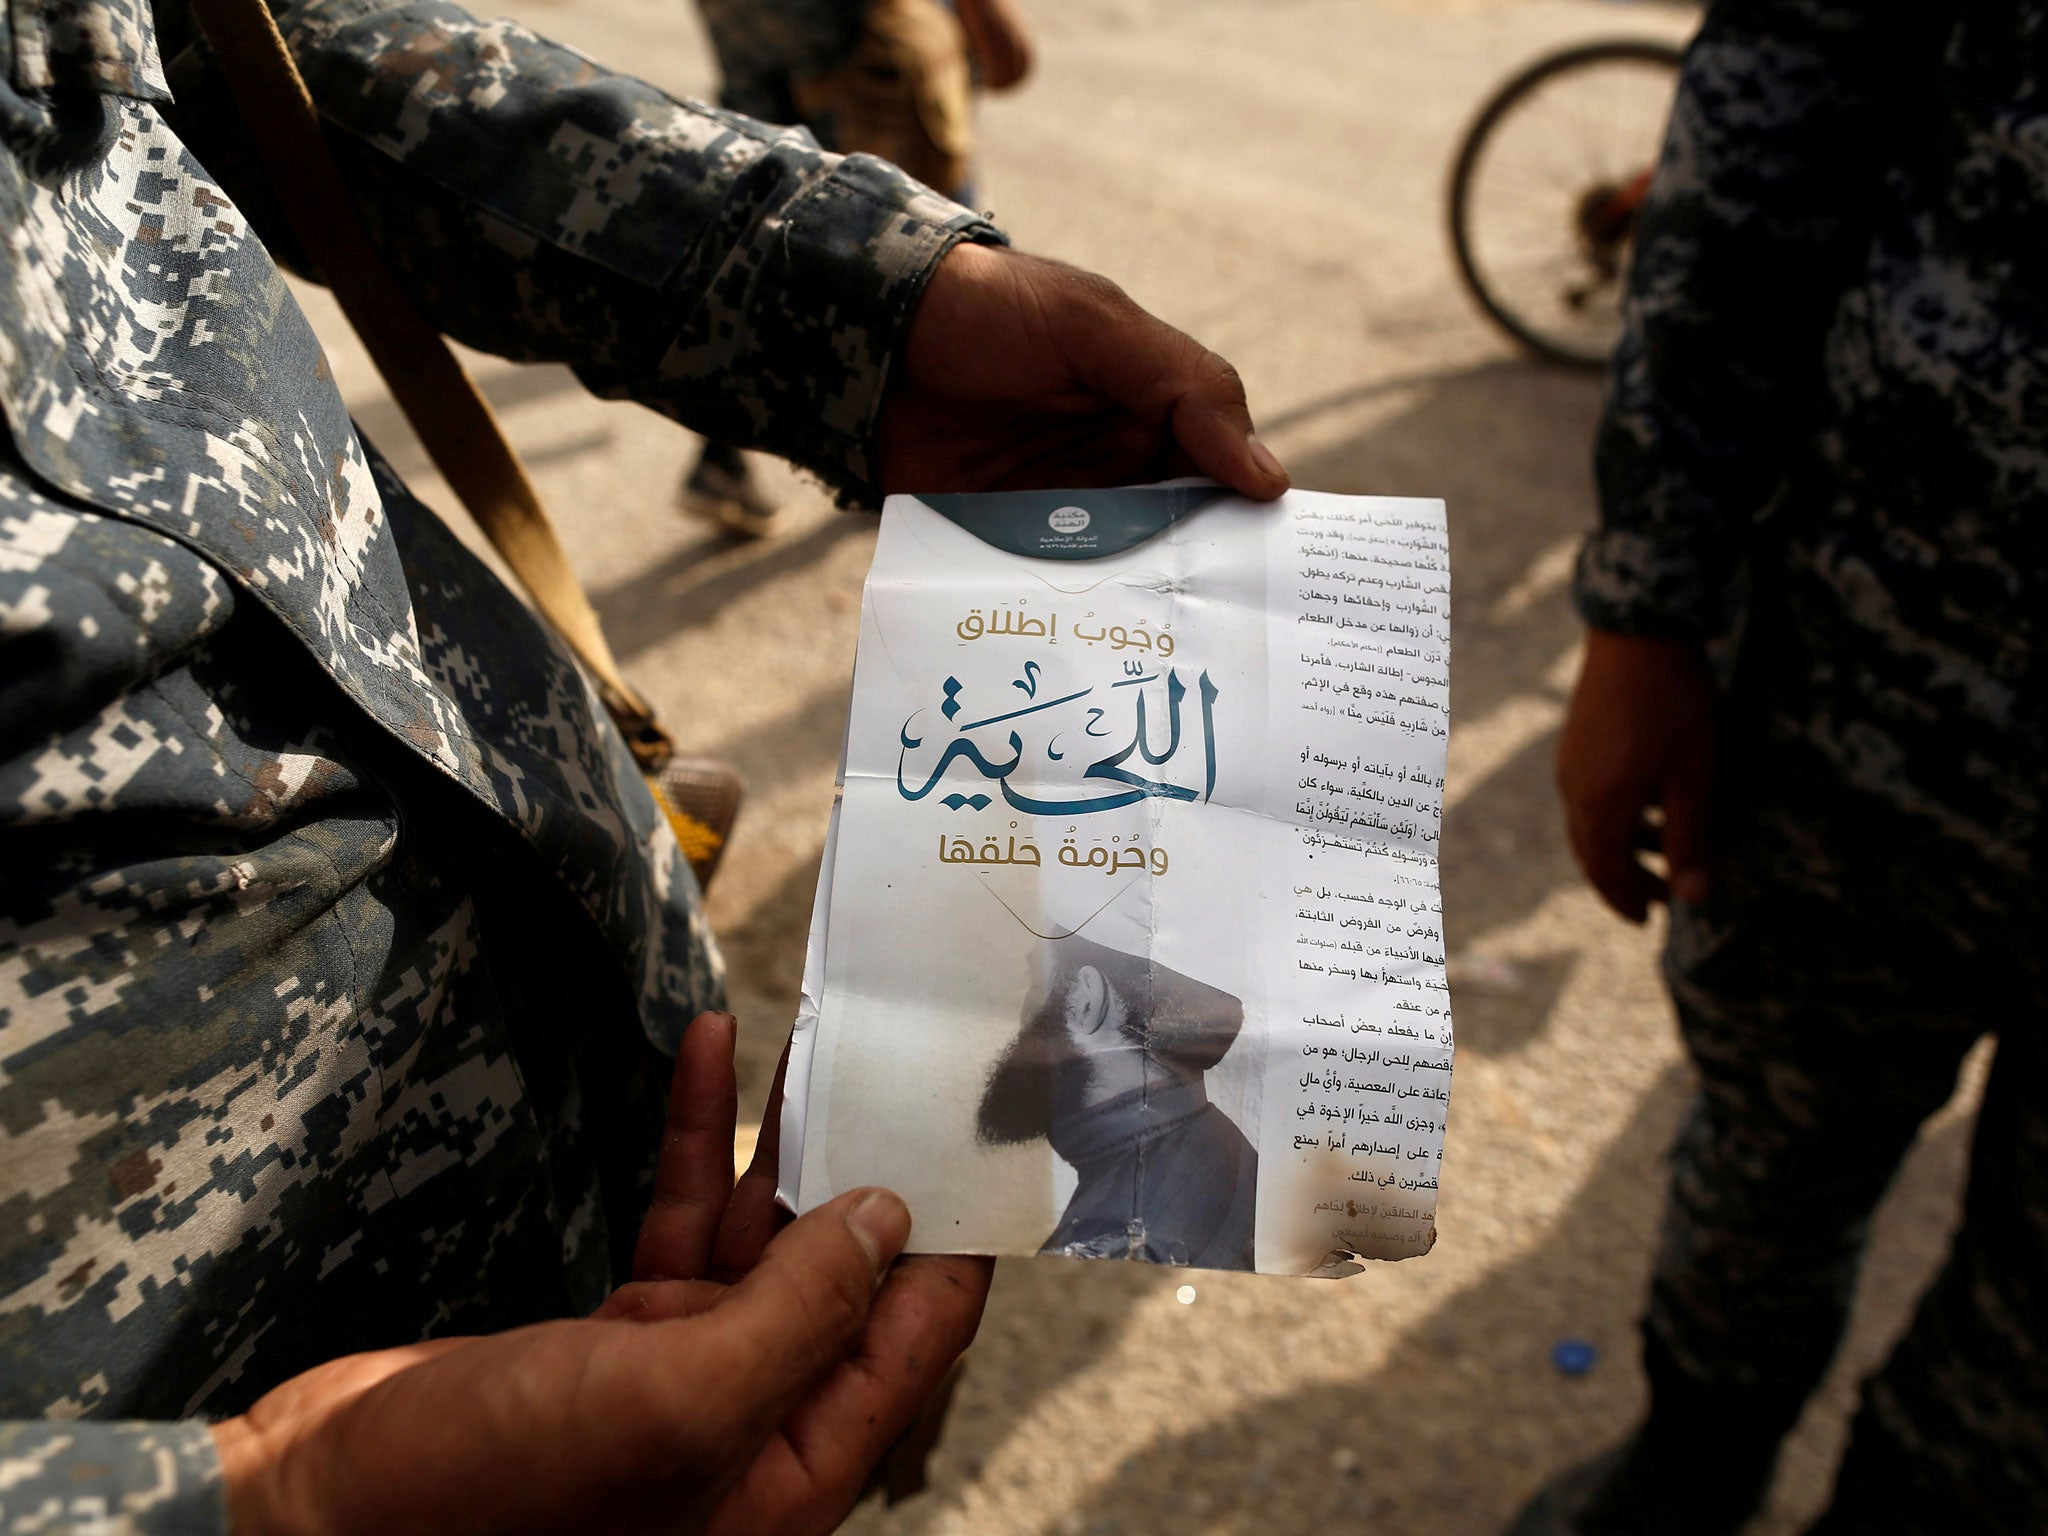 Members of the Iraqi forces said the documents originated from Isis